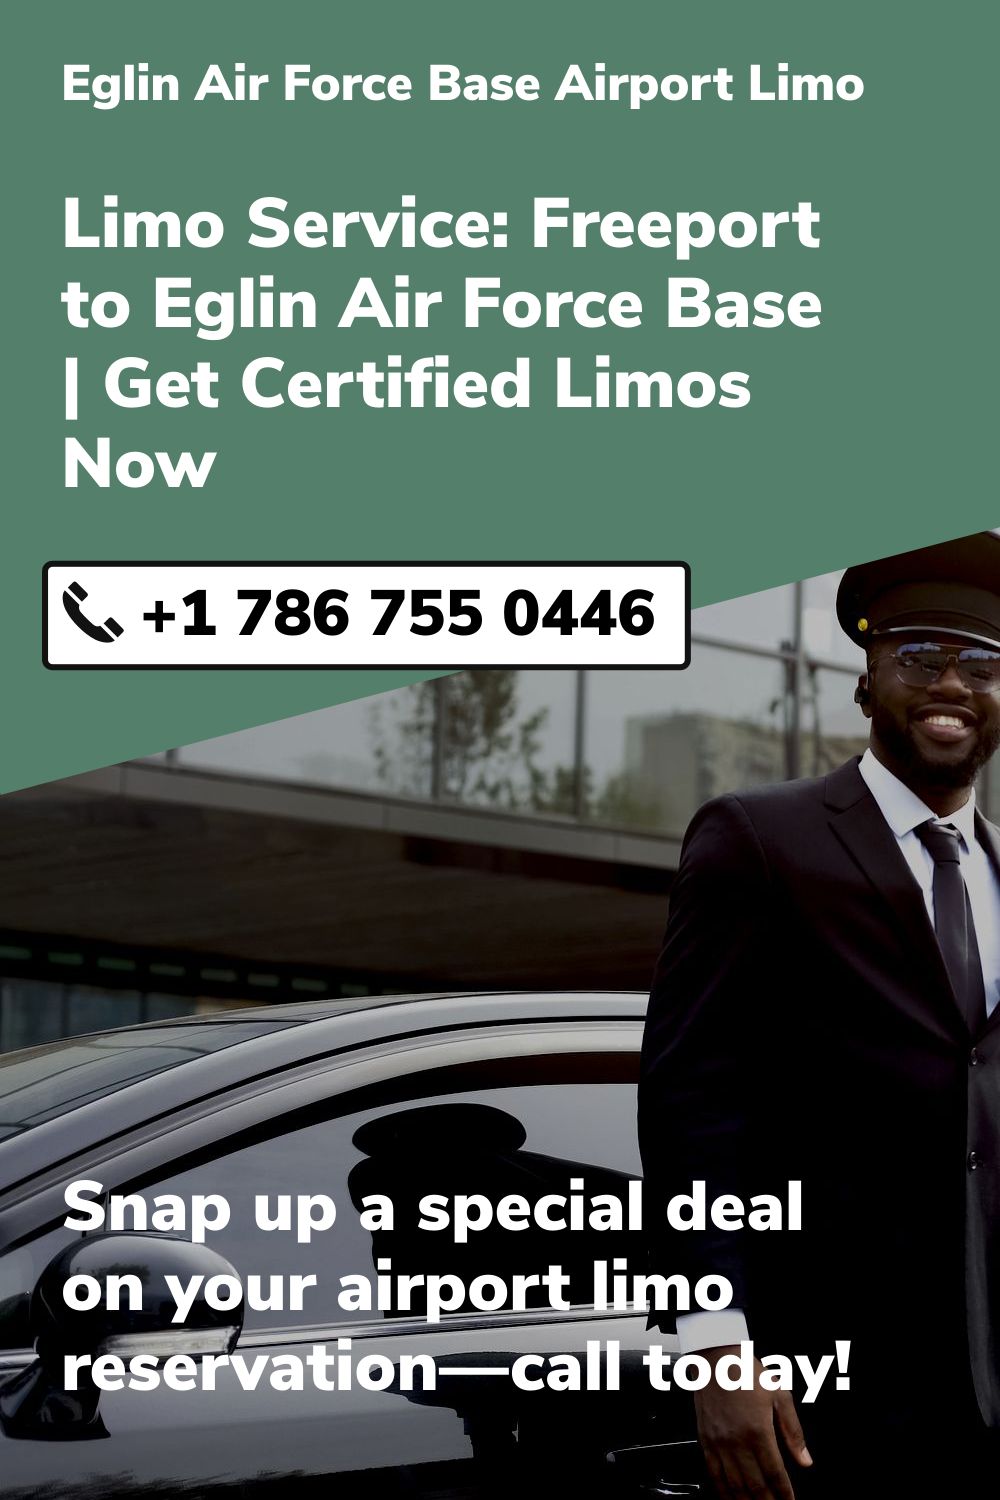 Eglin Air Force Base Airport Limo